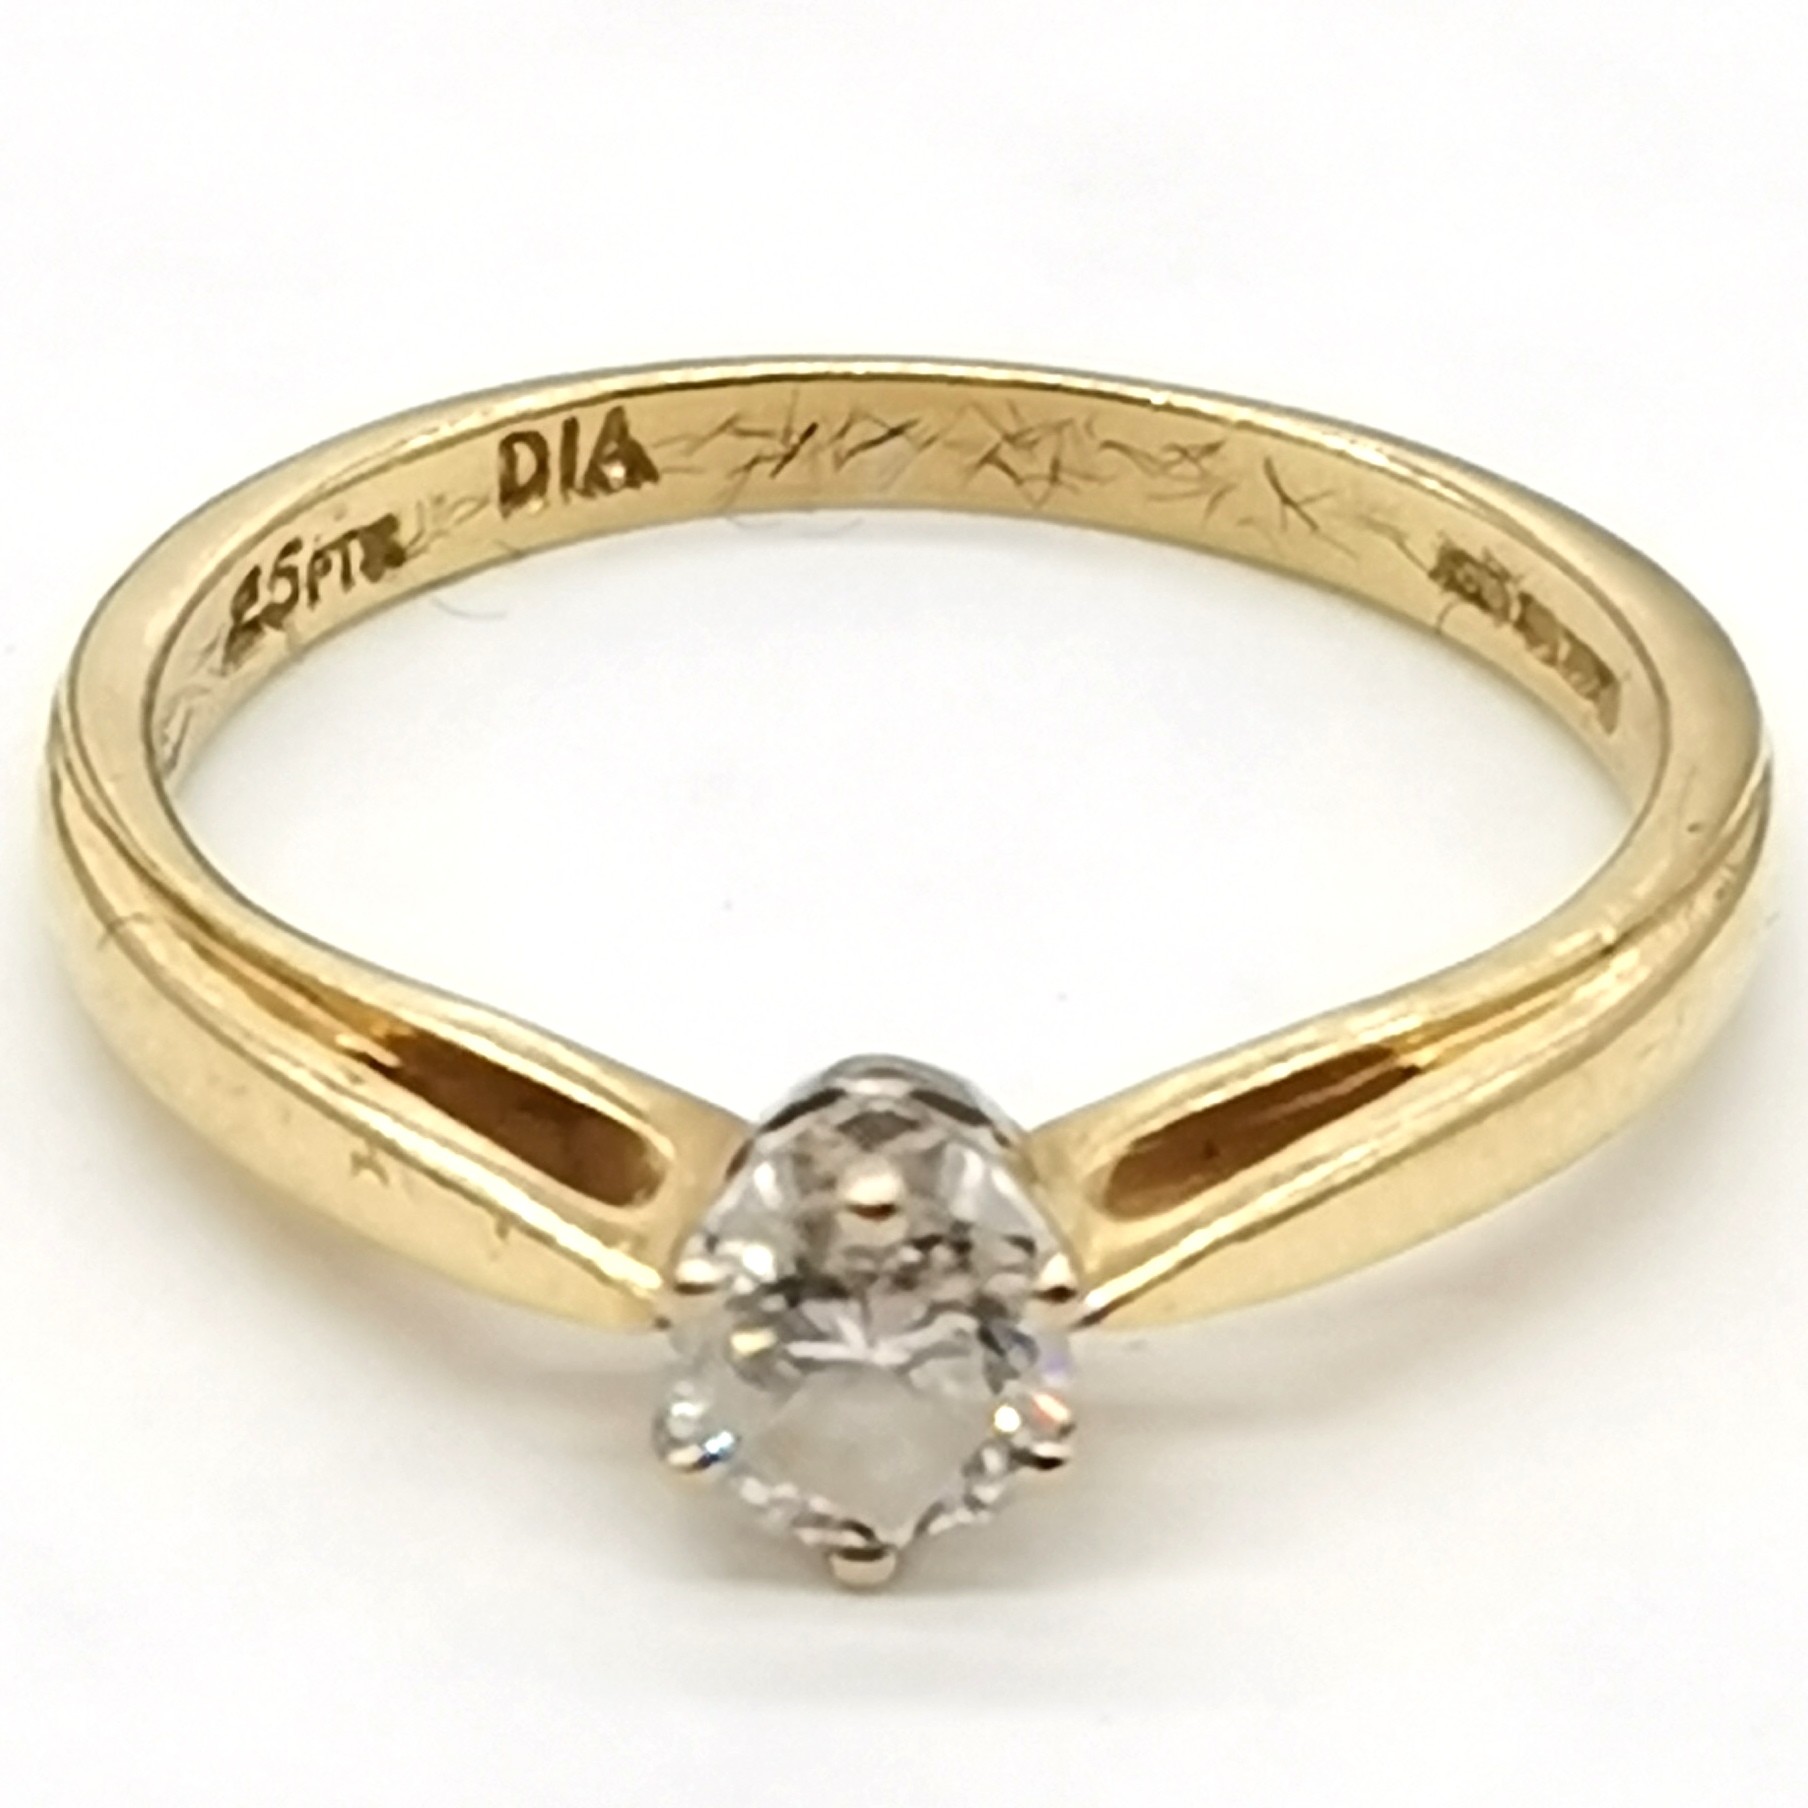 18ct hallmarked gold solitaire diamond ring - size L½ & 2.4g total weight ~ the diamond is approx